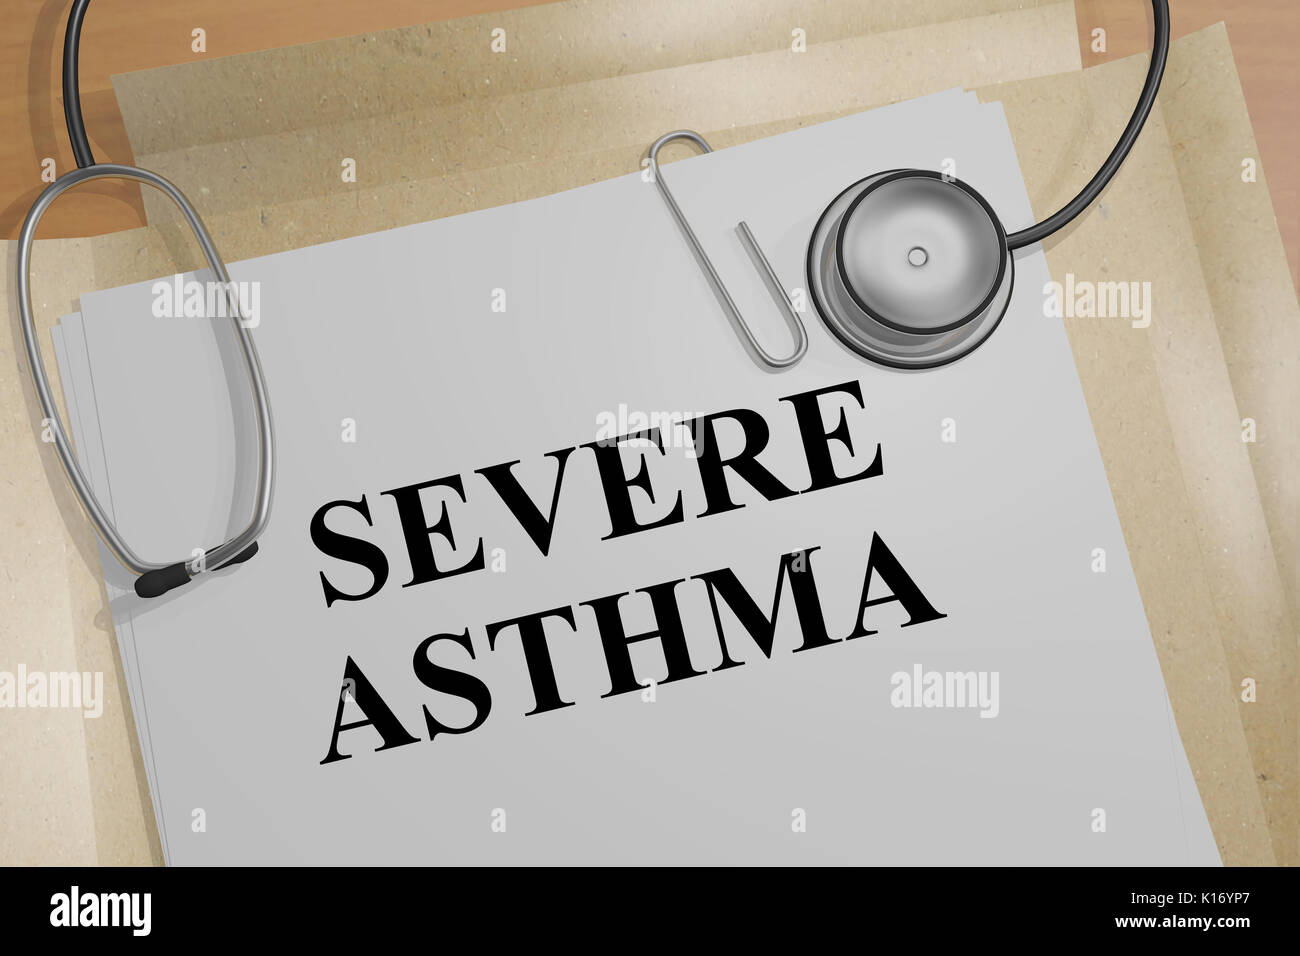 3D illustration of 'SEVERE ASTHMA' title on a document Stock Photo